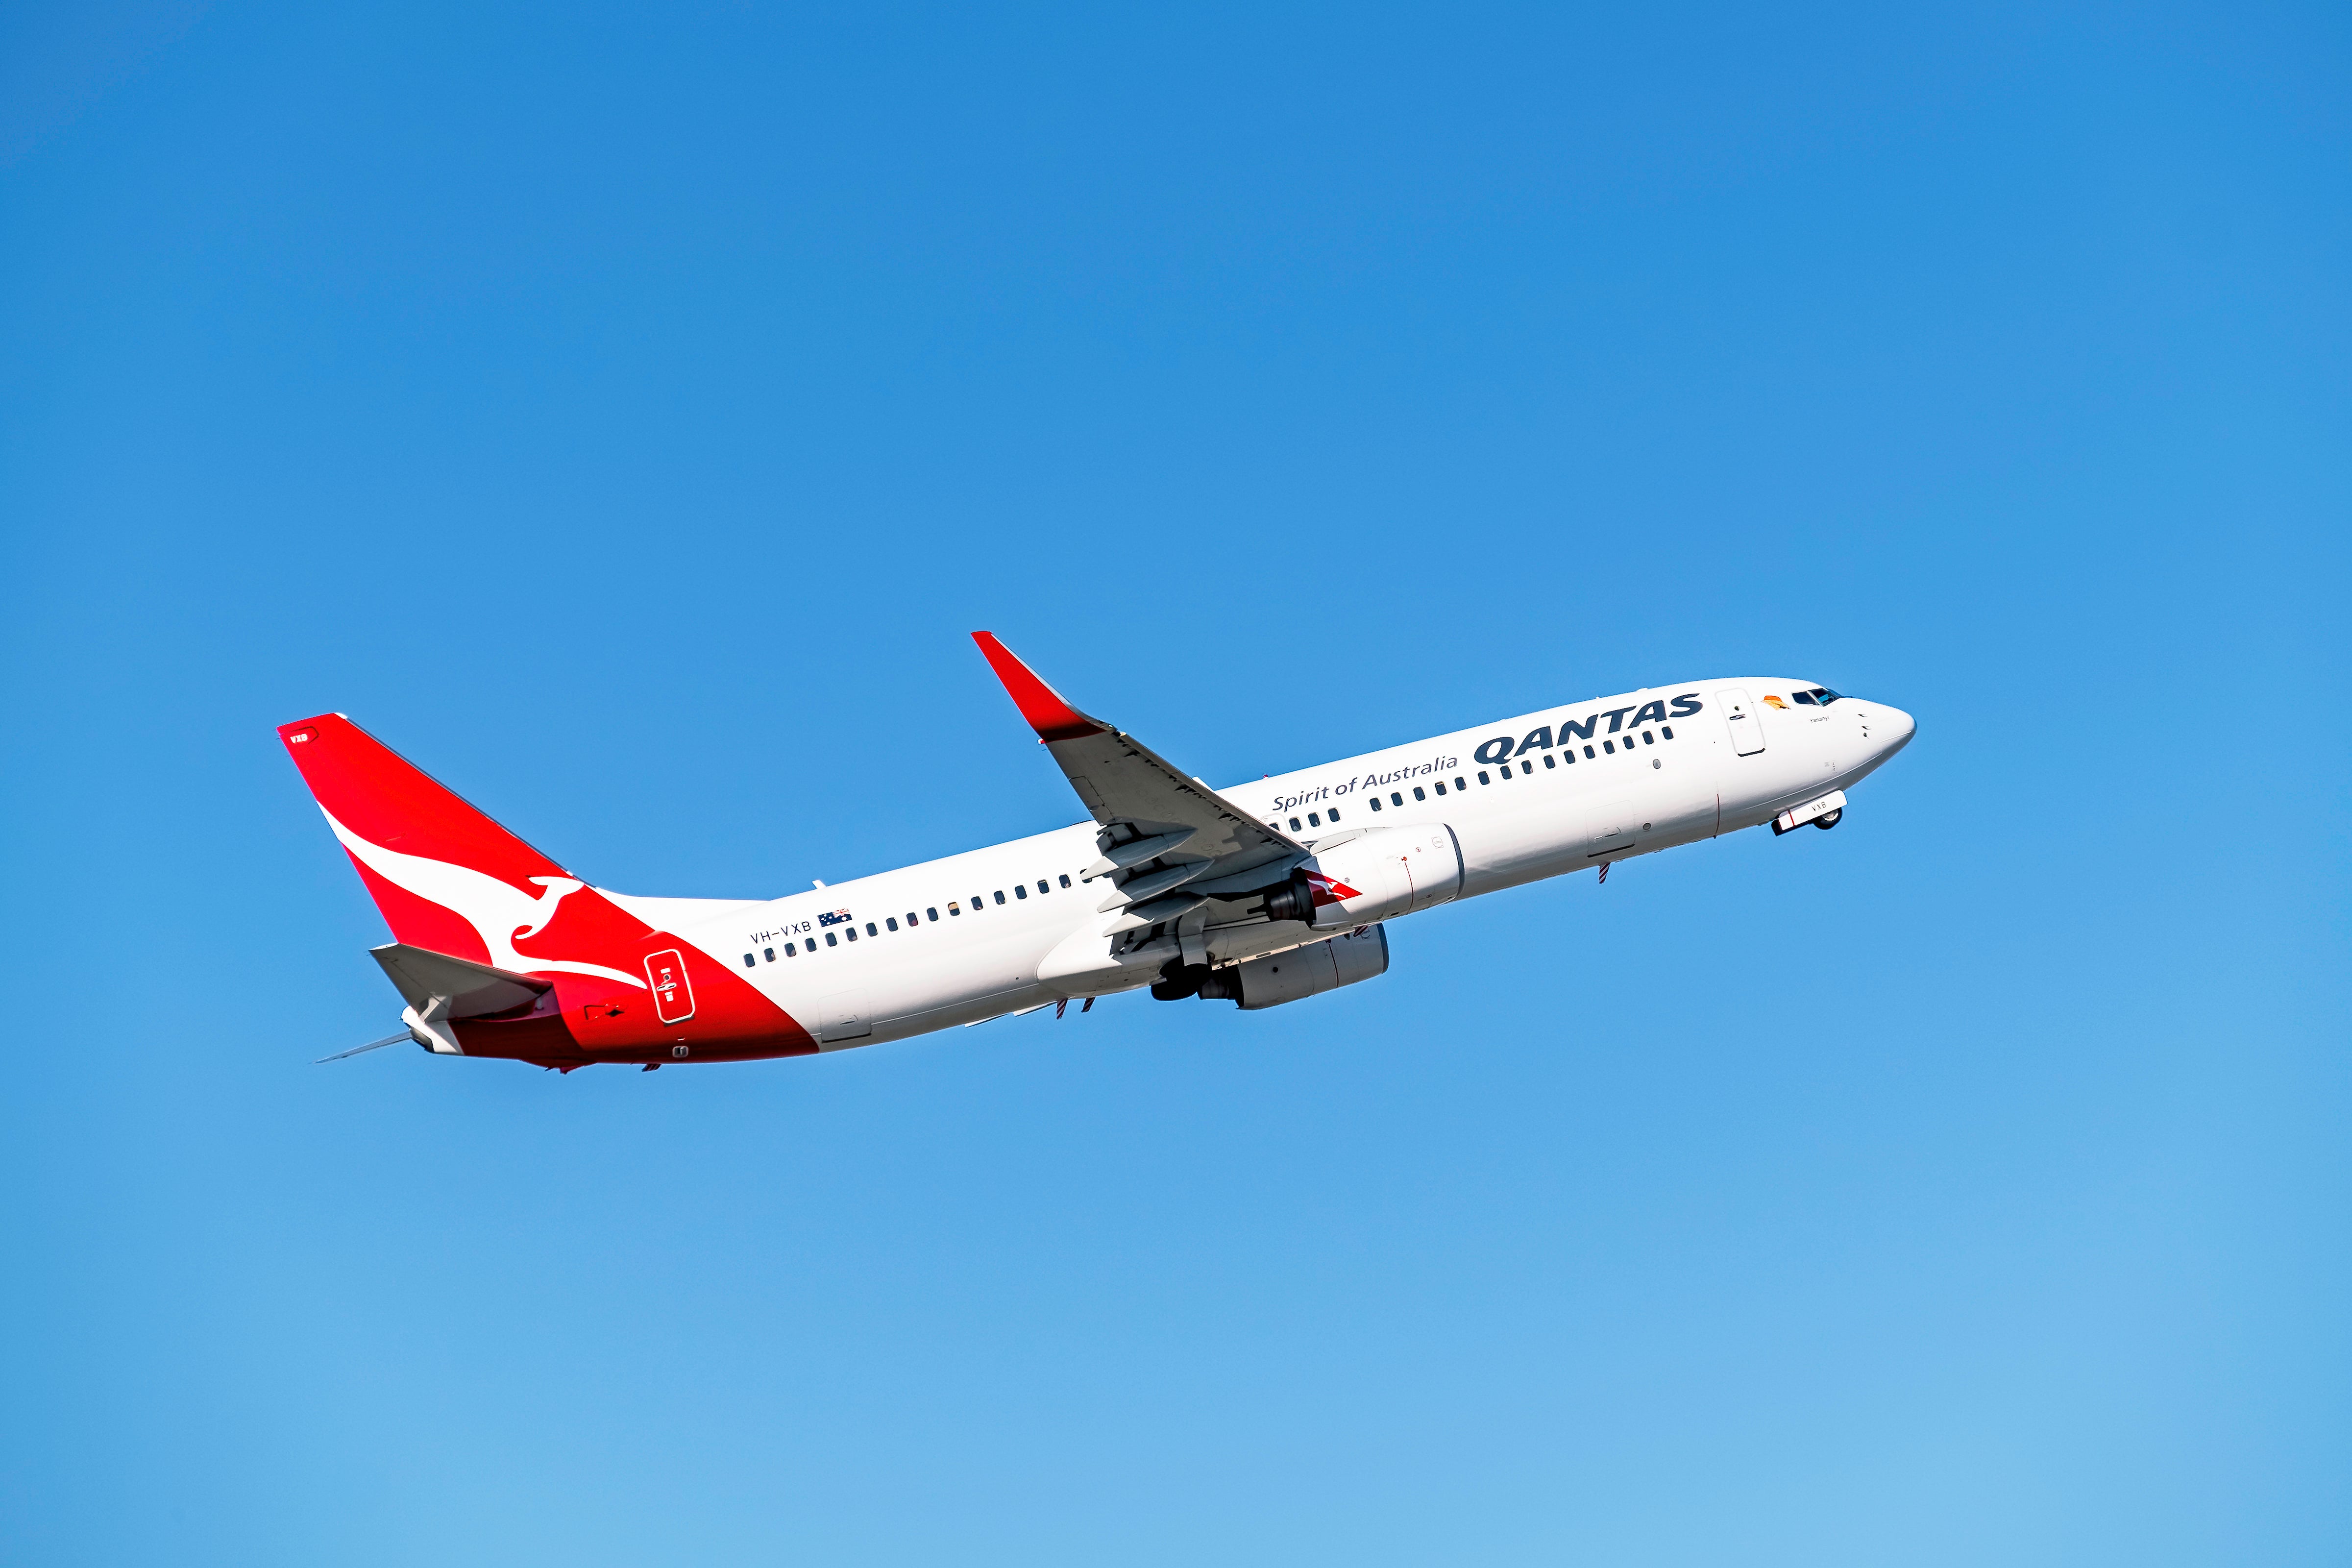 Qantas tops the list, with Air New Zealand claiming second place